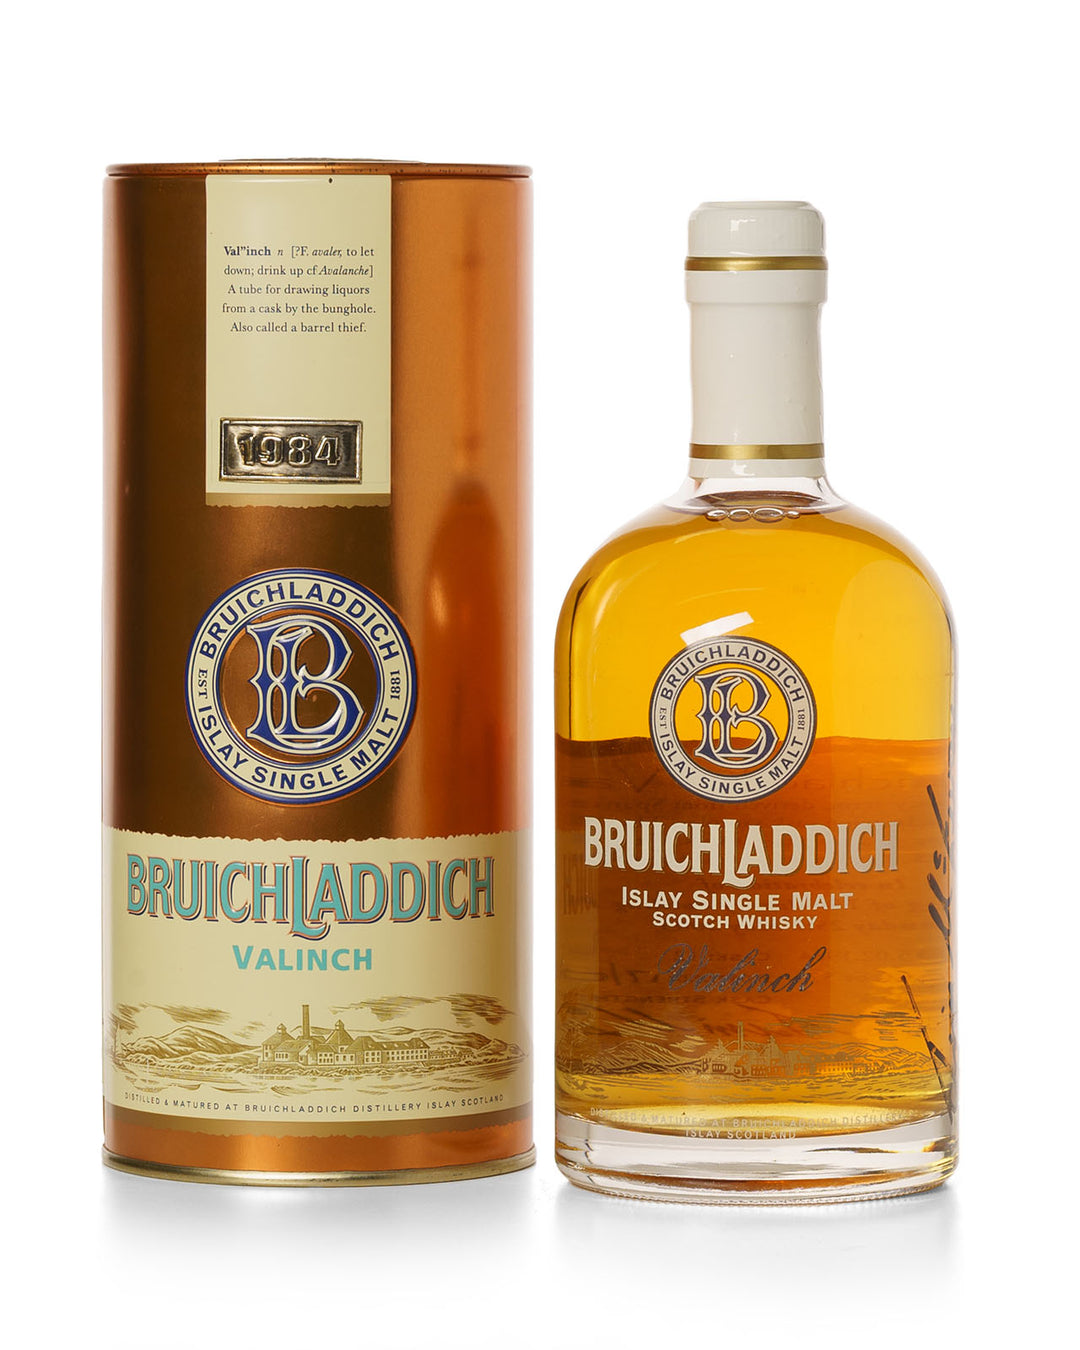 Bruichladdich Valinch 1984 19 Year Old "Opening of Harvey Building" Bottled 2003 50cl With Original Metal Tin